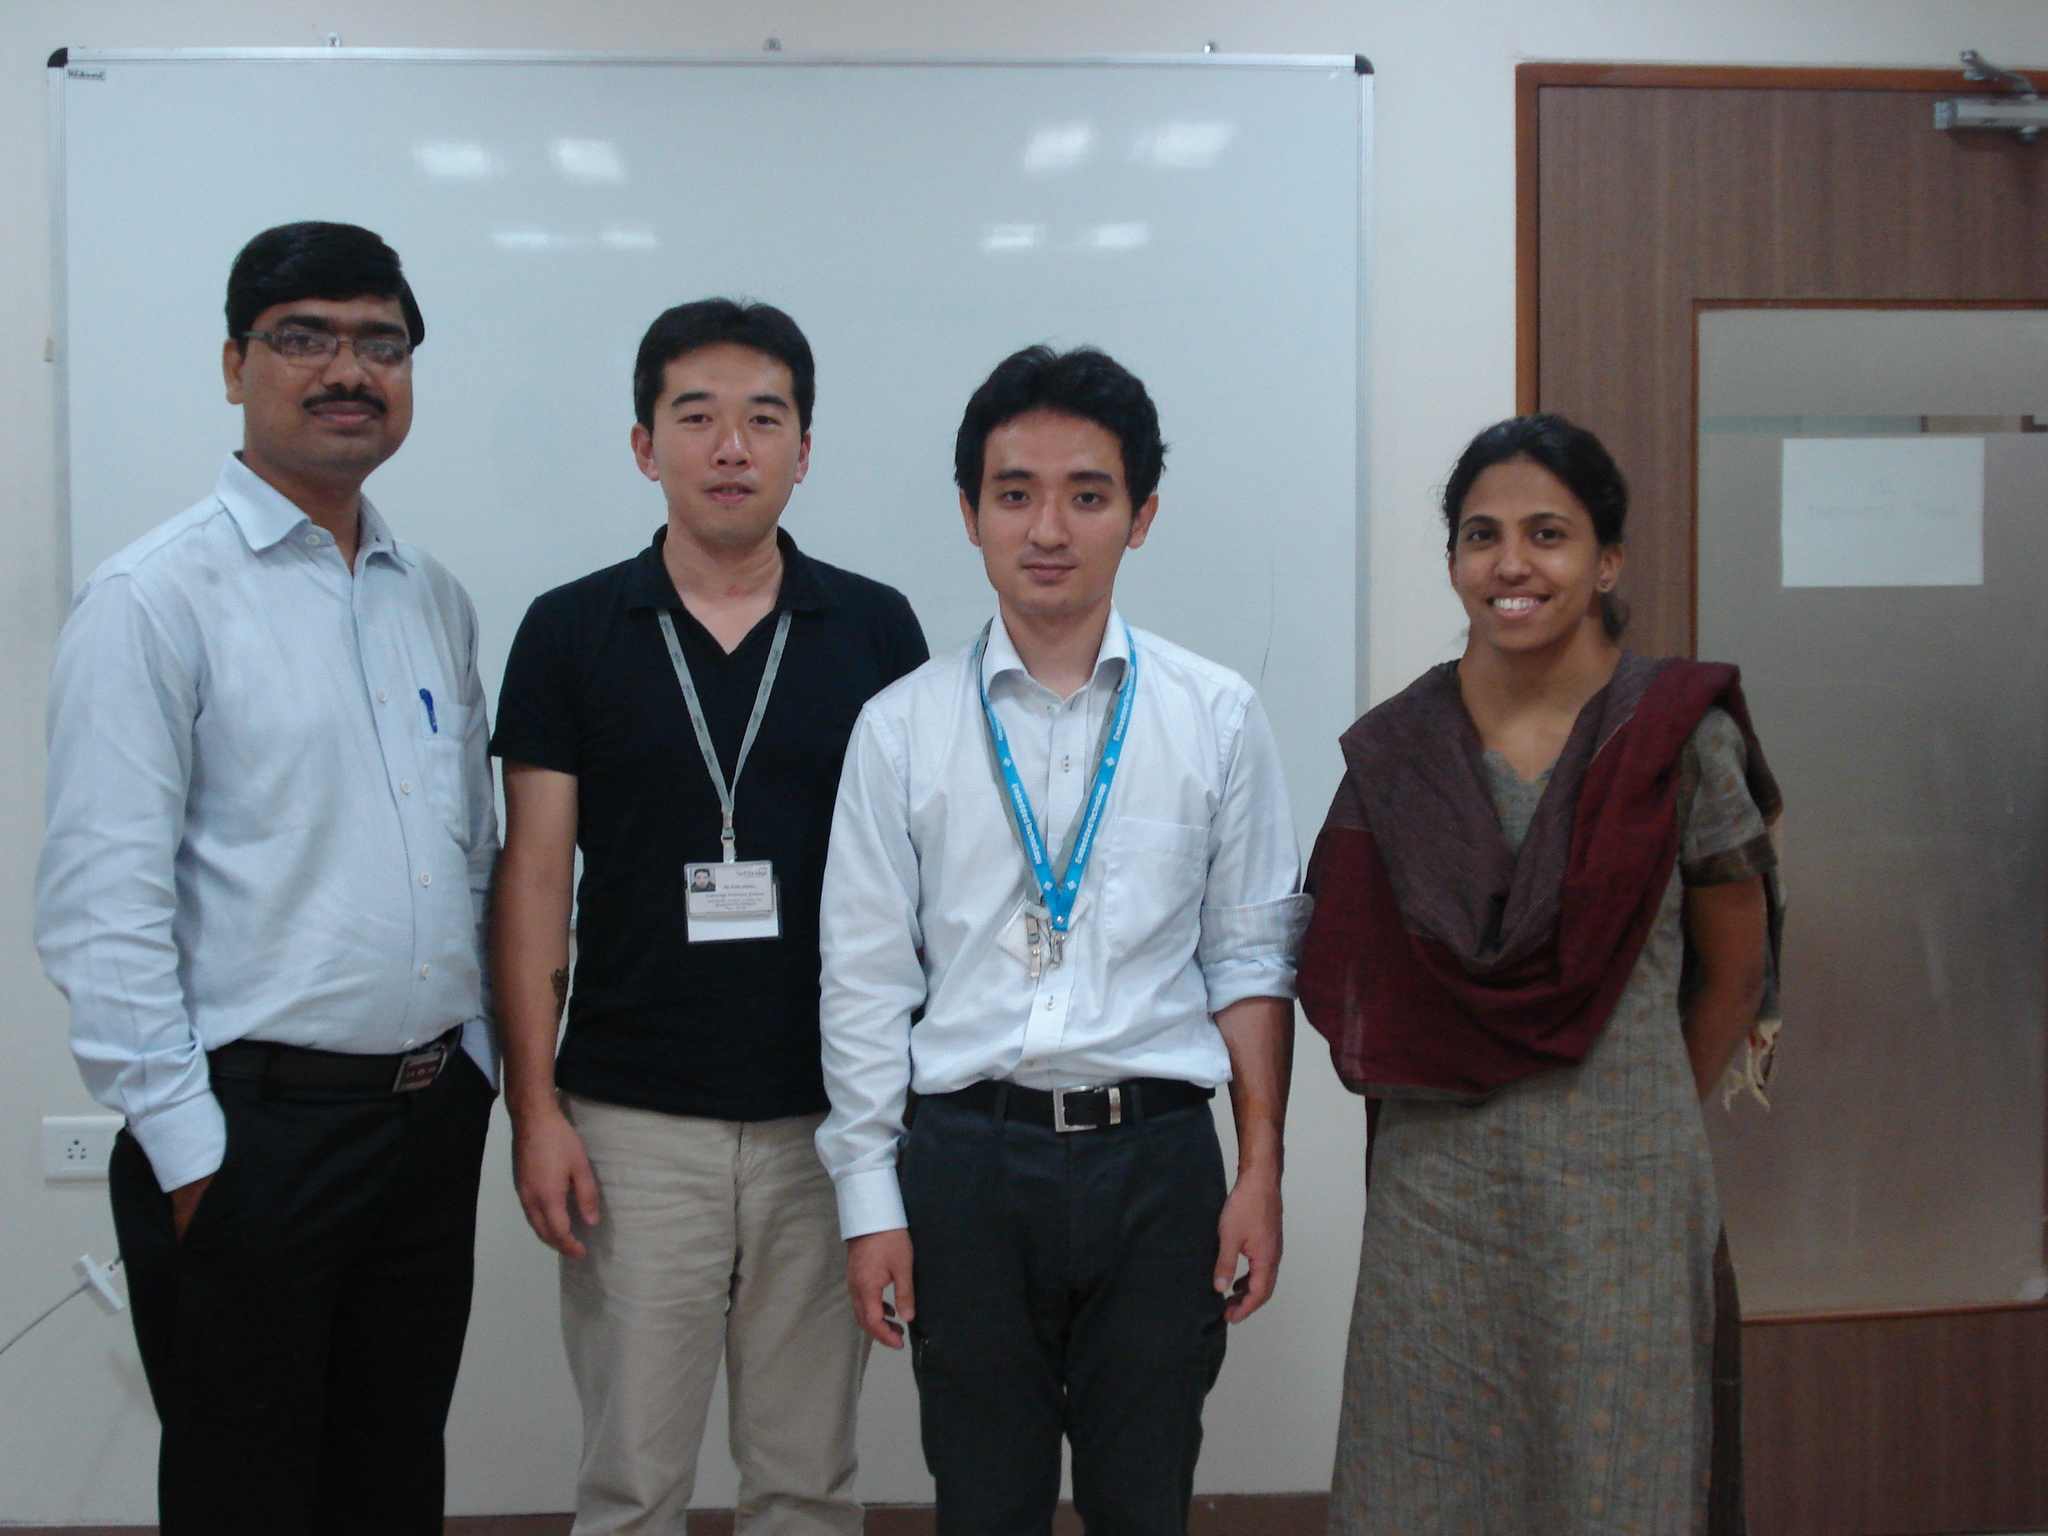 Japanese-Participants-With-Faculty-2-compressed